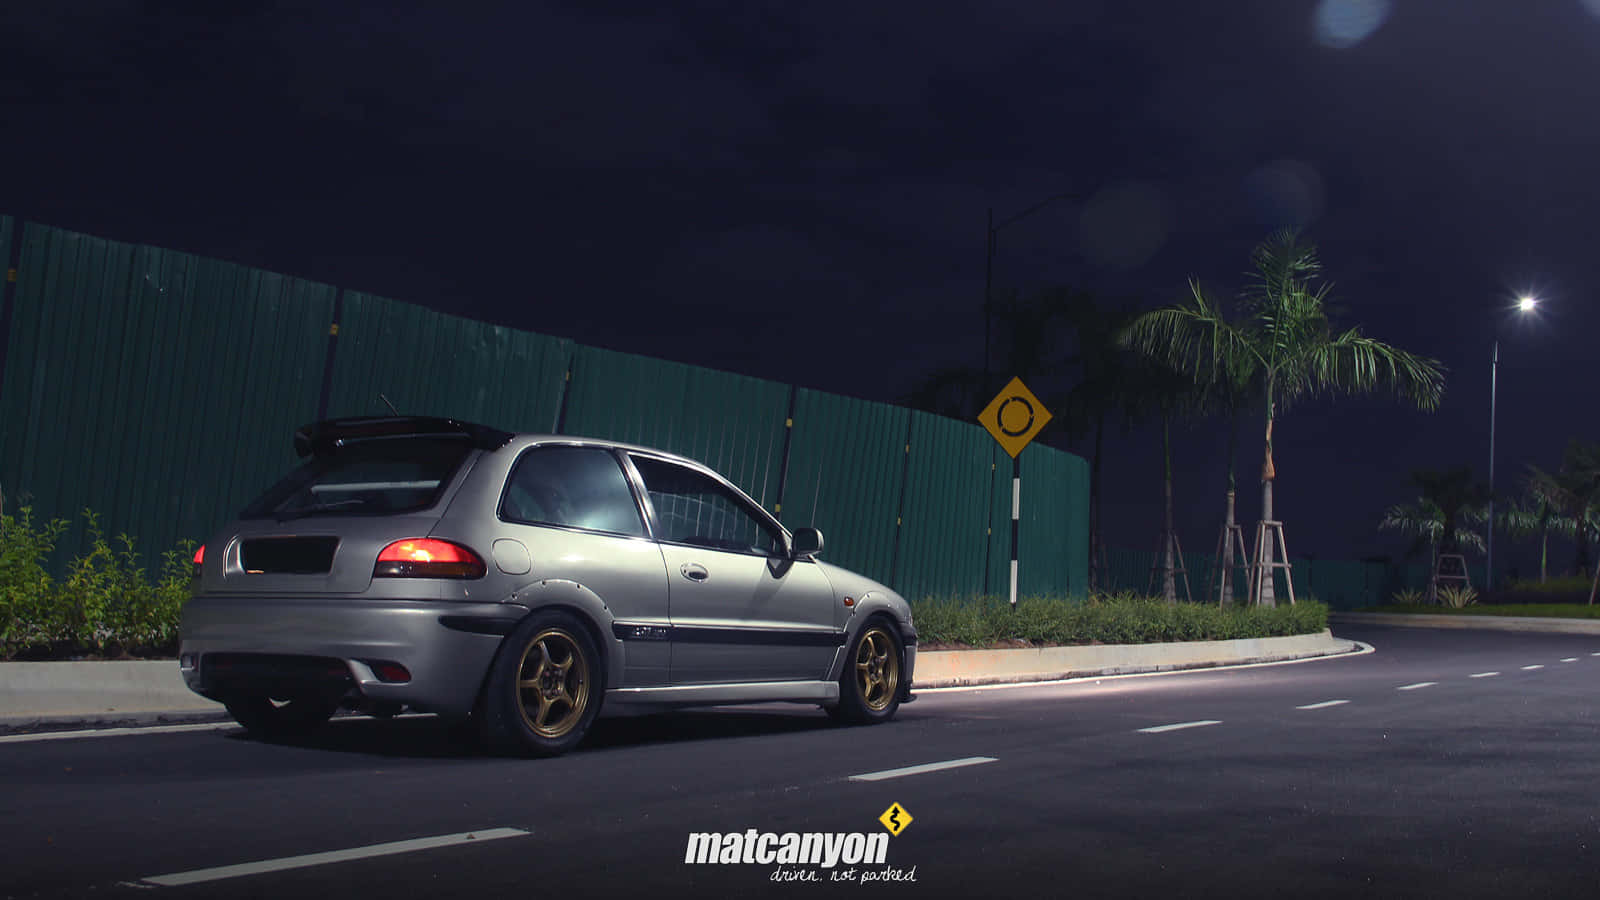 Stunning Proton Car in Action Wallpaper